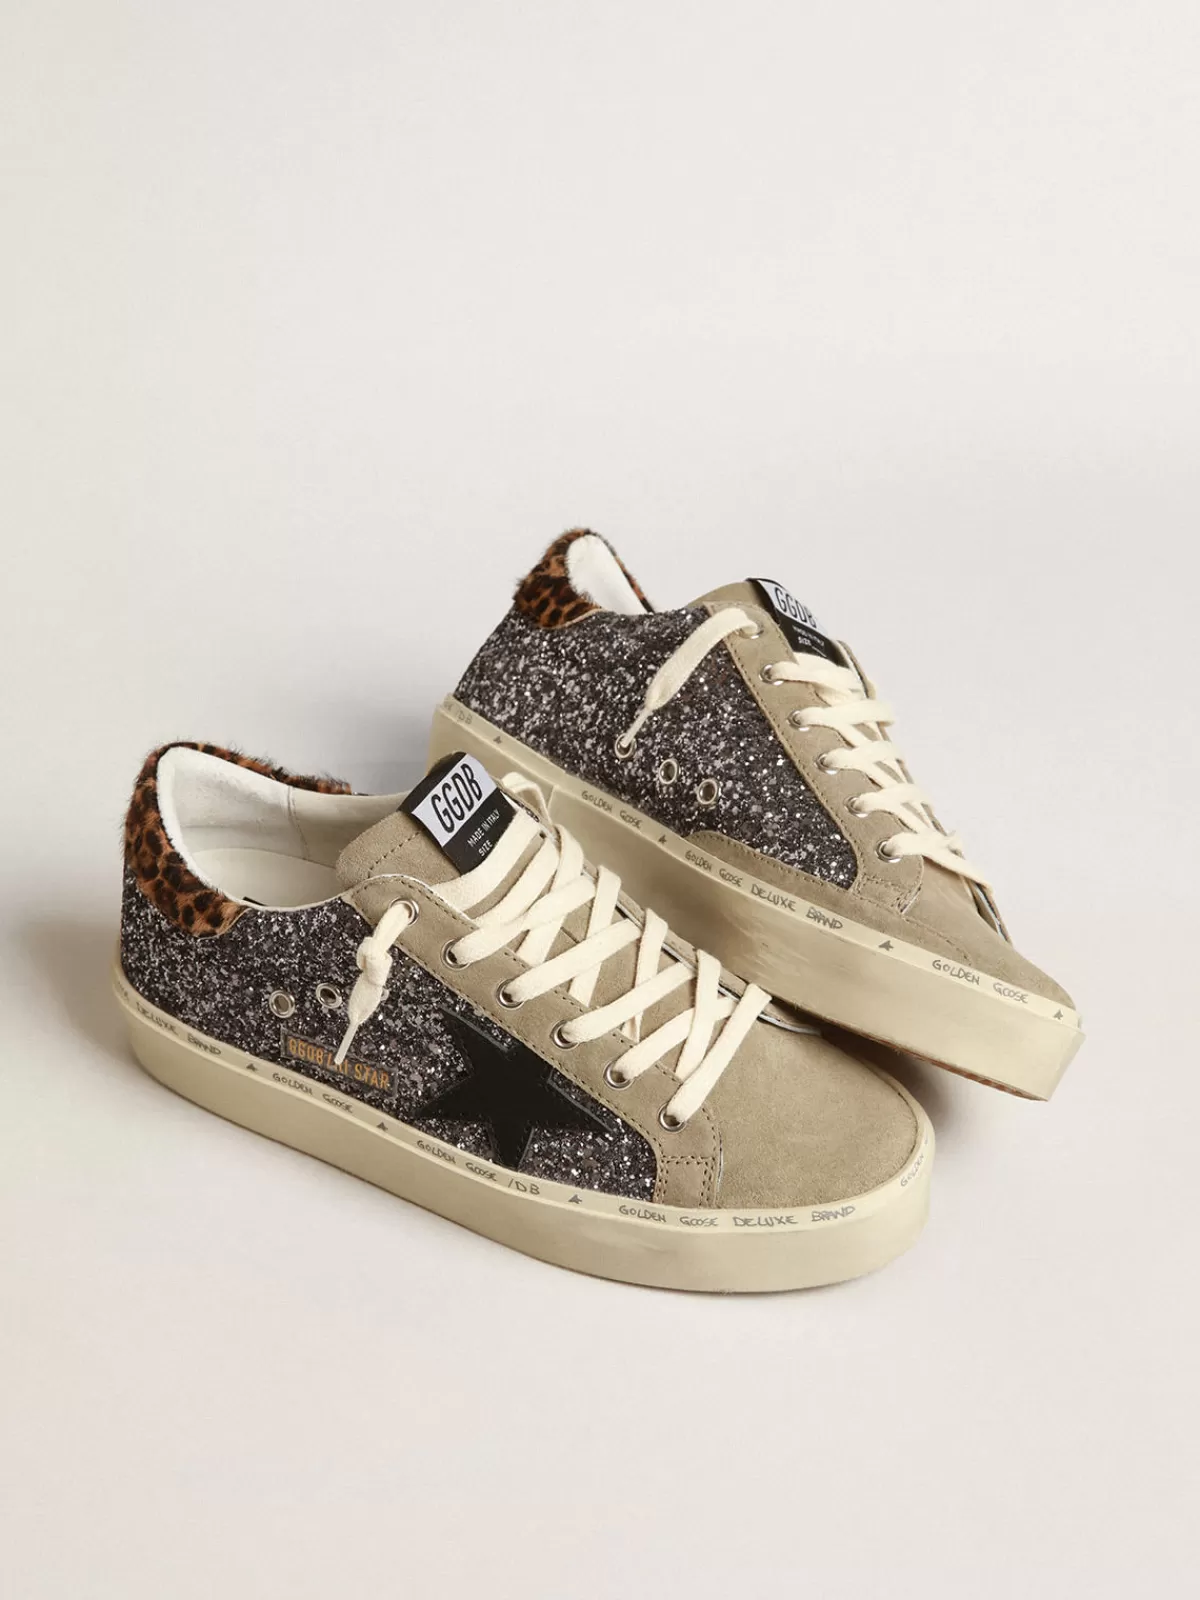 Golden Goose Hi Star in dark gray glitter with a black leather star Clearance